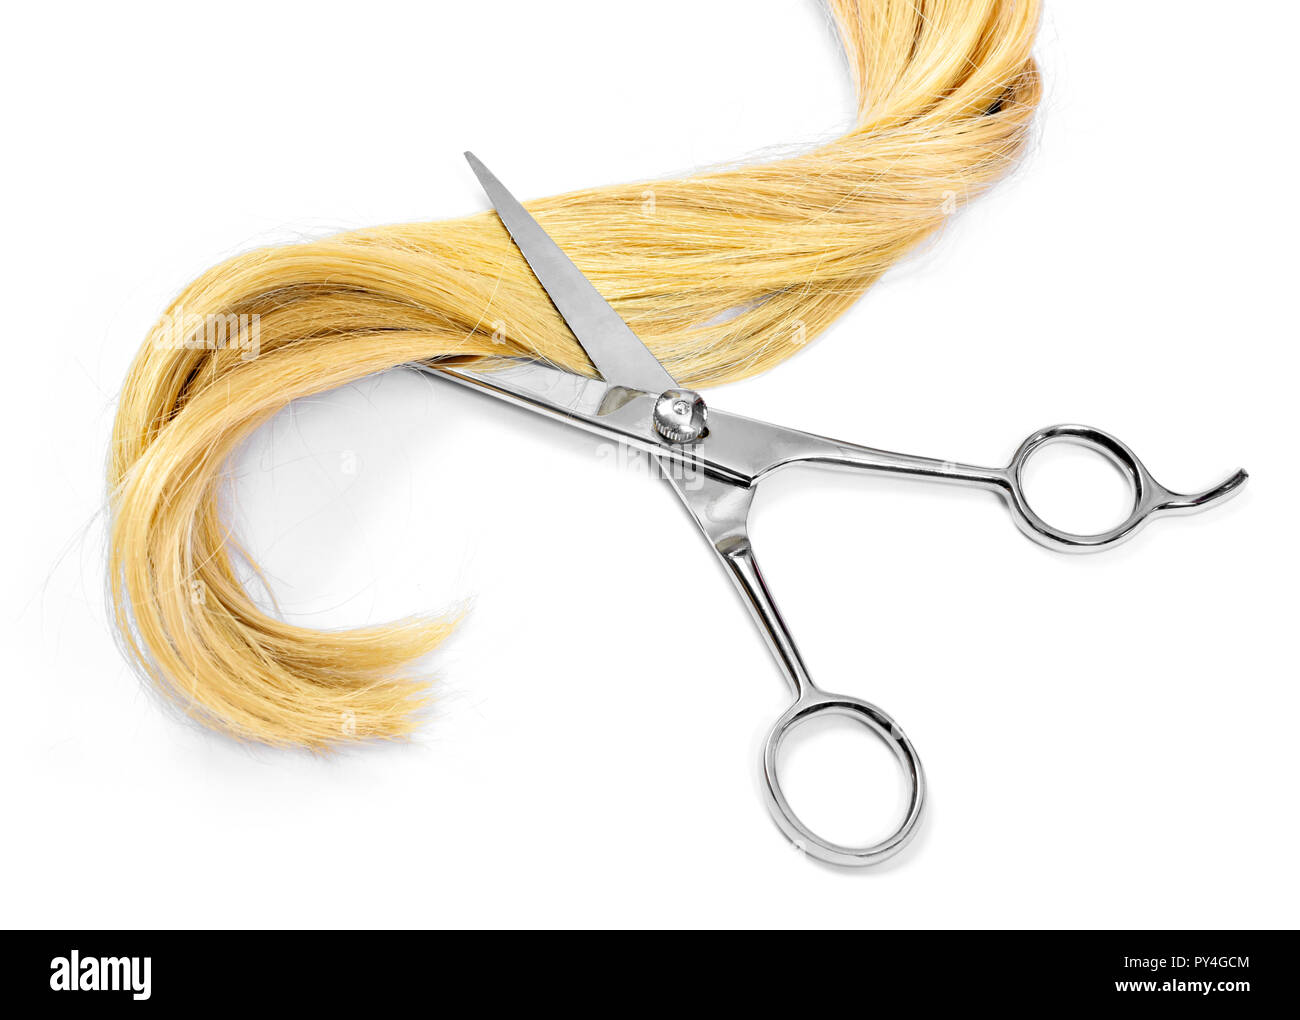 Beautiful blond hair and scissors, isolated on white background. Long blonde hair tail, curly and healthy hair, hair cutting theme. Stock Photo